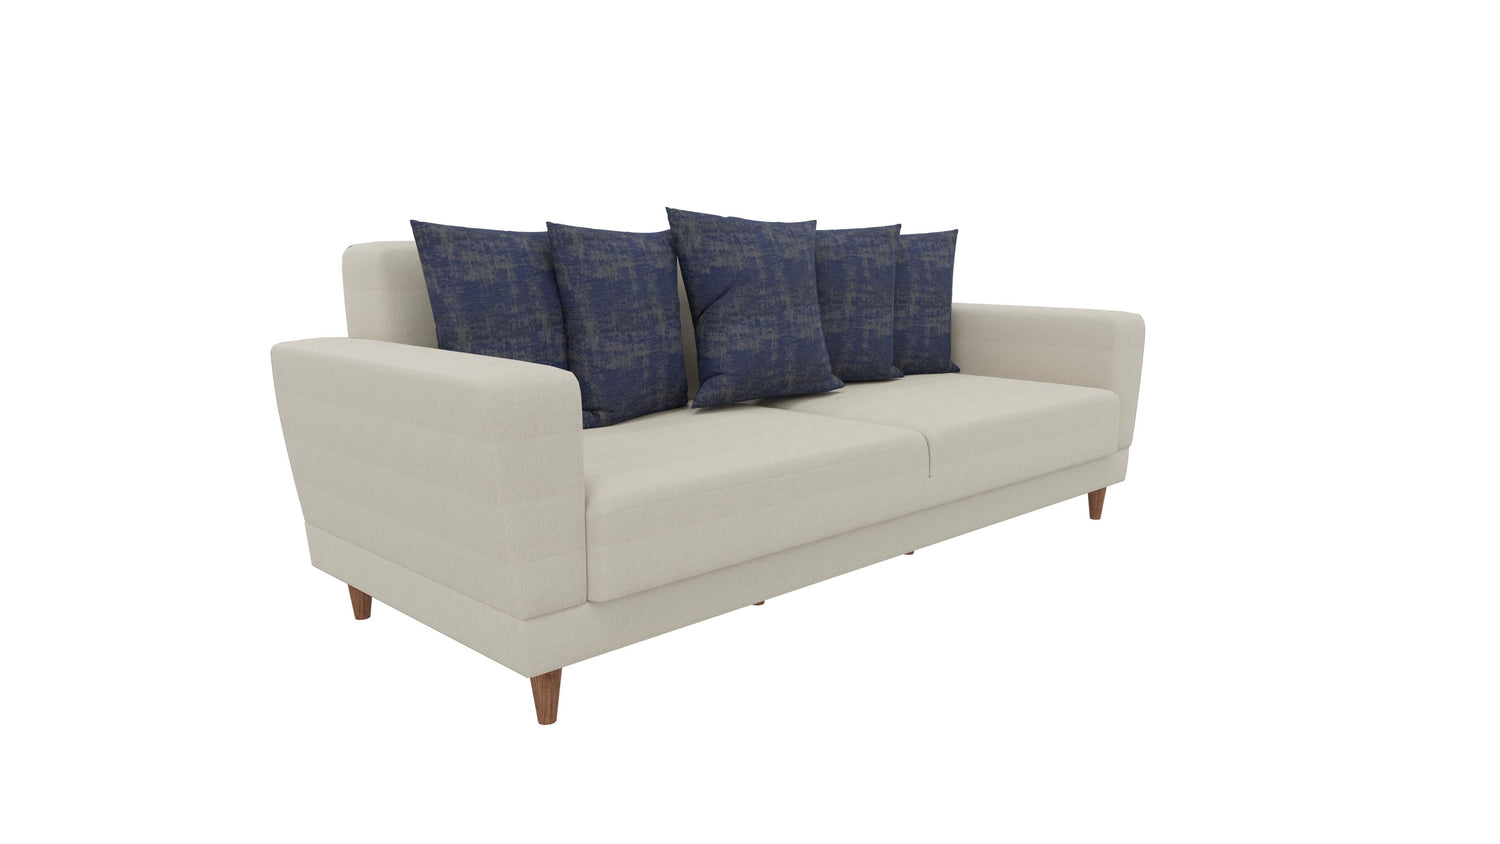 Dolce Cream/Blue 3-Seater Sofa Bed - DOLCE 03.302.0472.3365.0101.0000.20.03